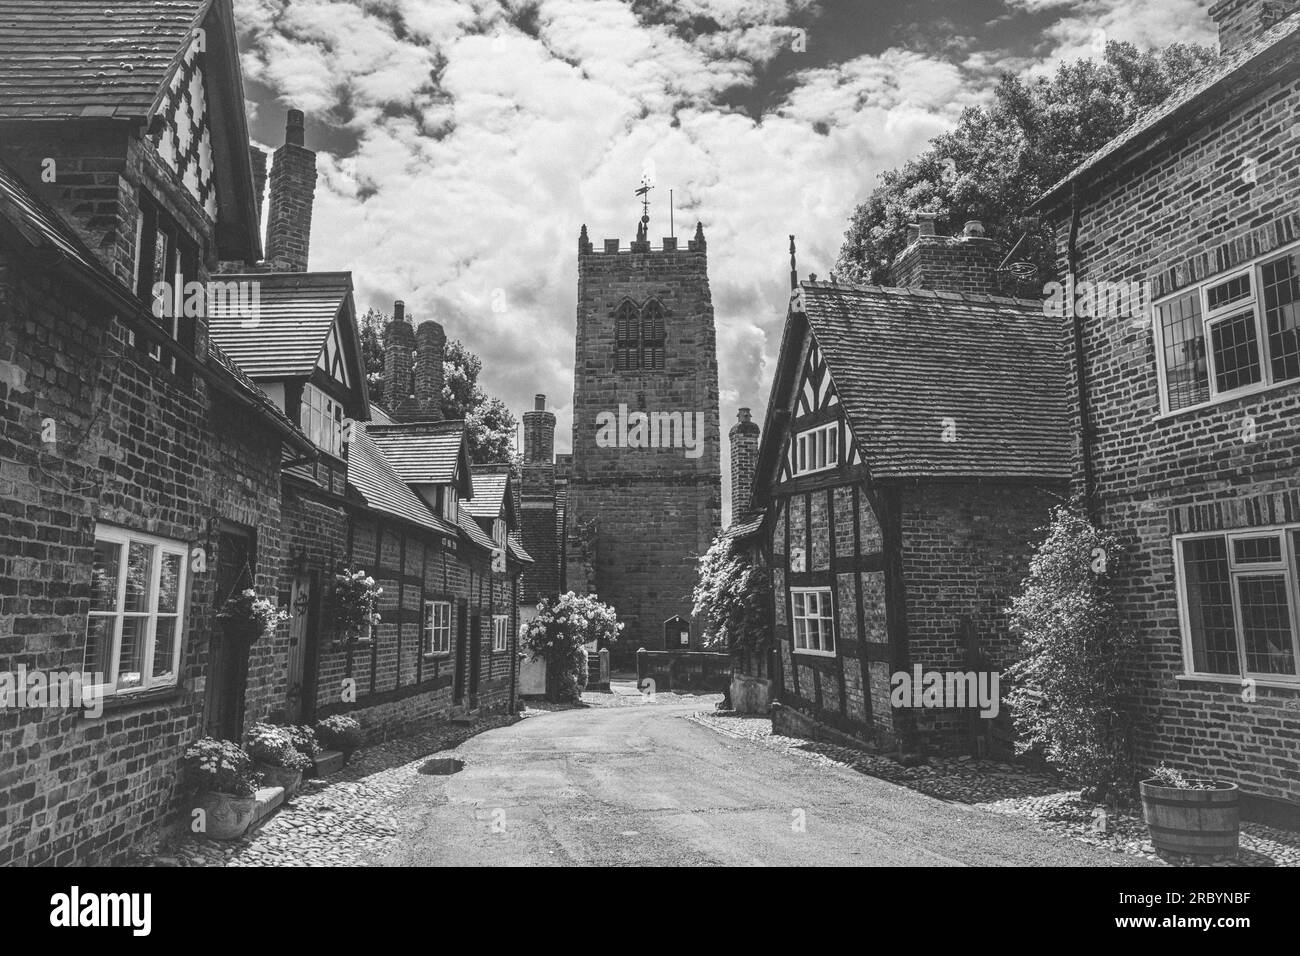 St Mary's and All Saints Church, Great Budworth, Cheshire Foto Stock